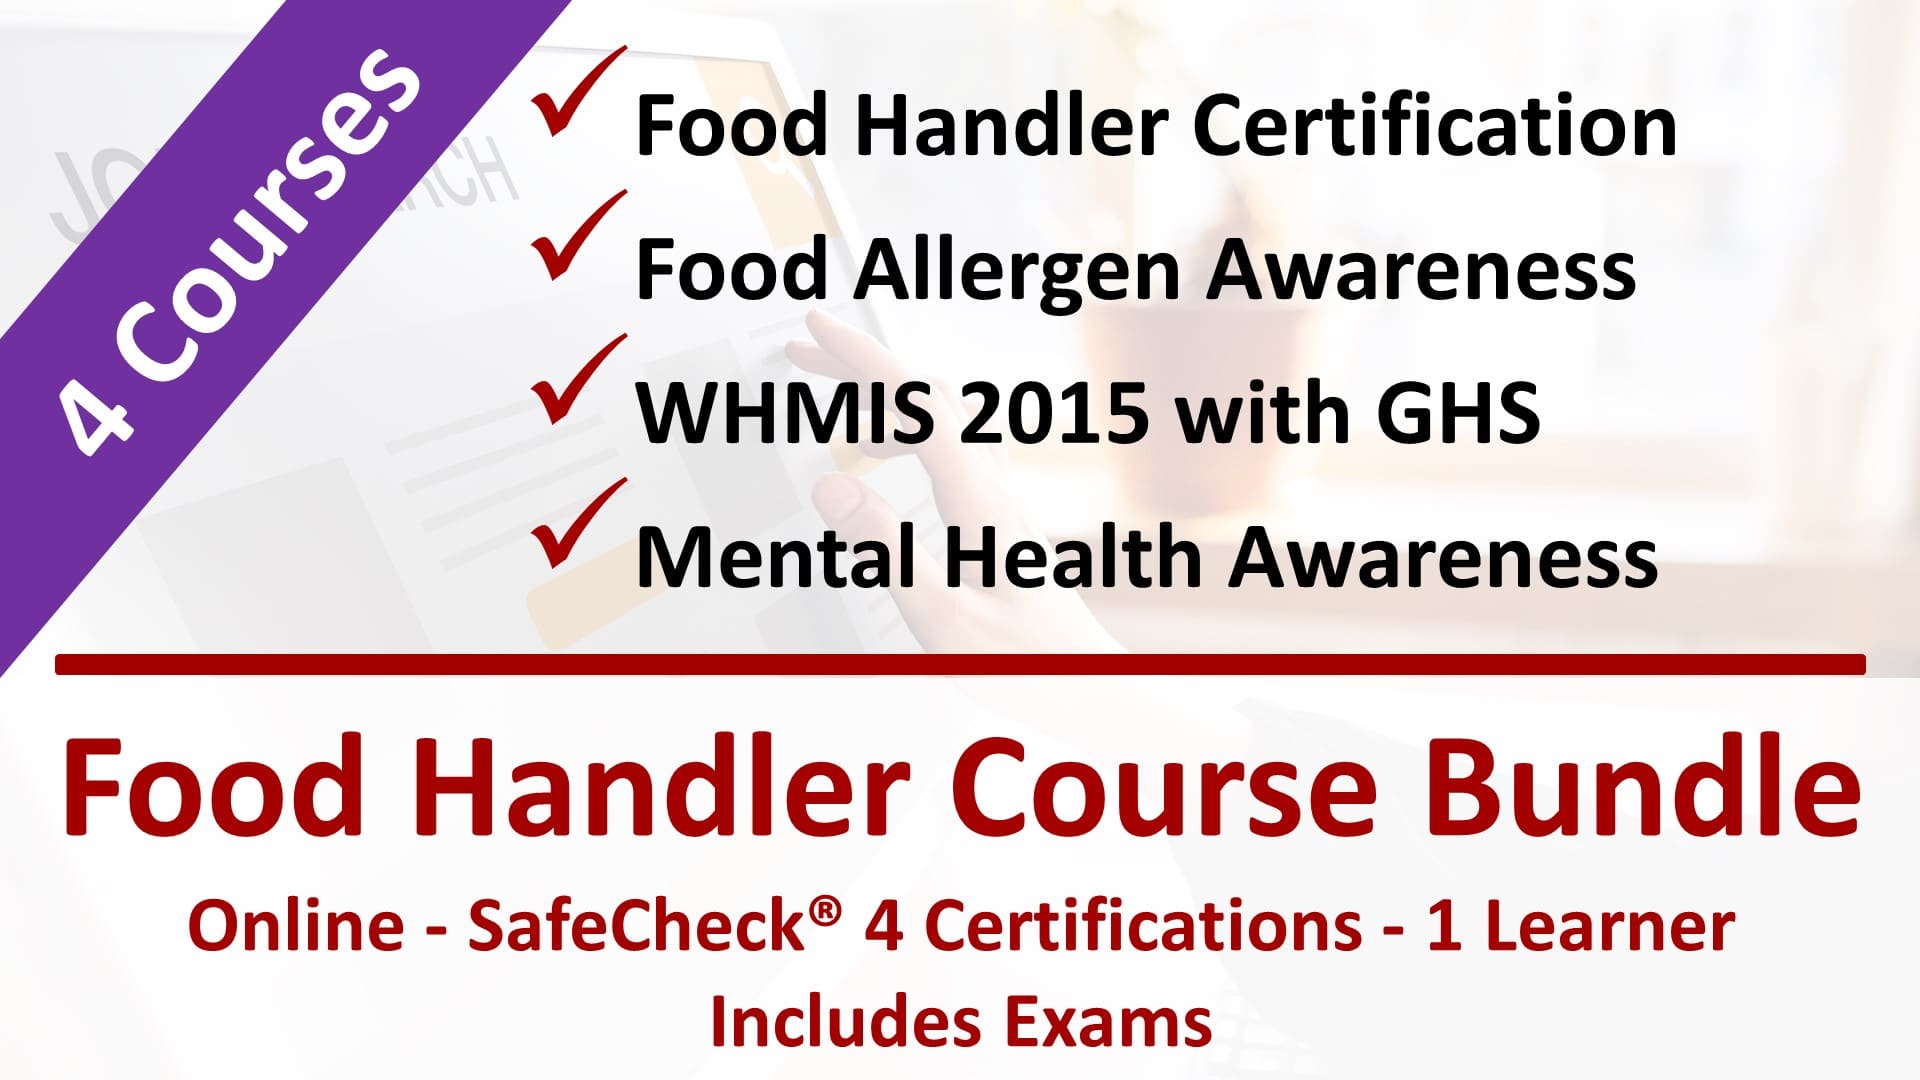 4 Course Food Safety Bundle Includes WHMIS, Allergen Awareness, Mental Health Awareness